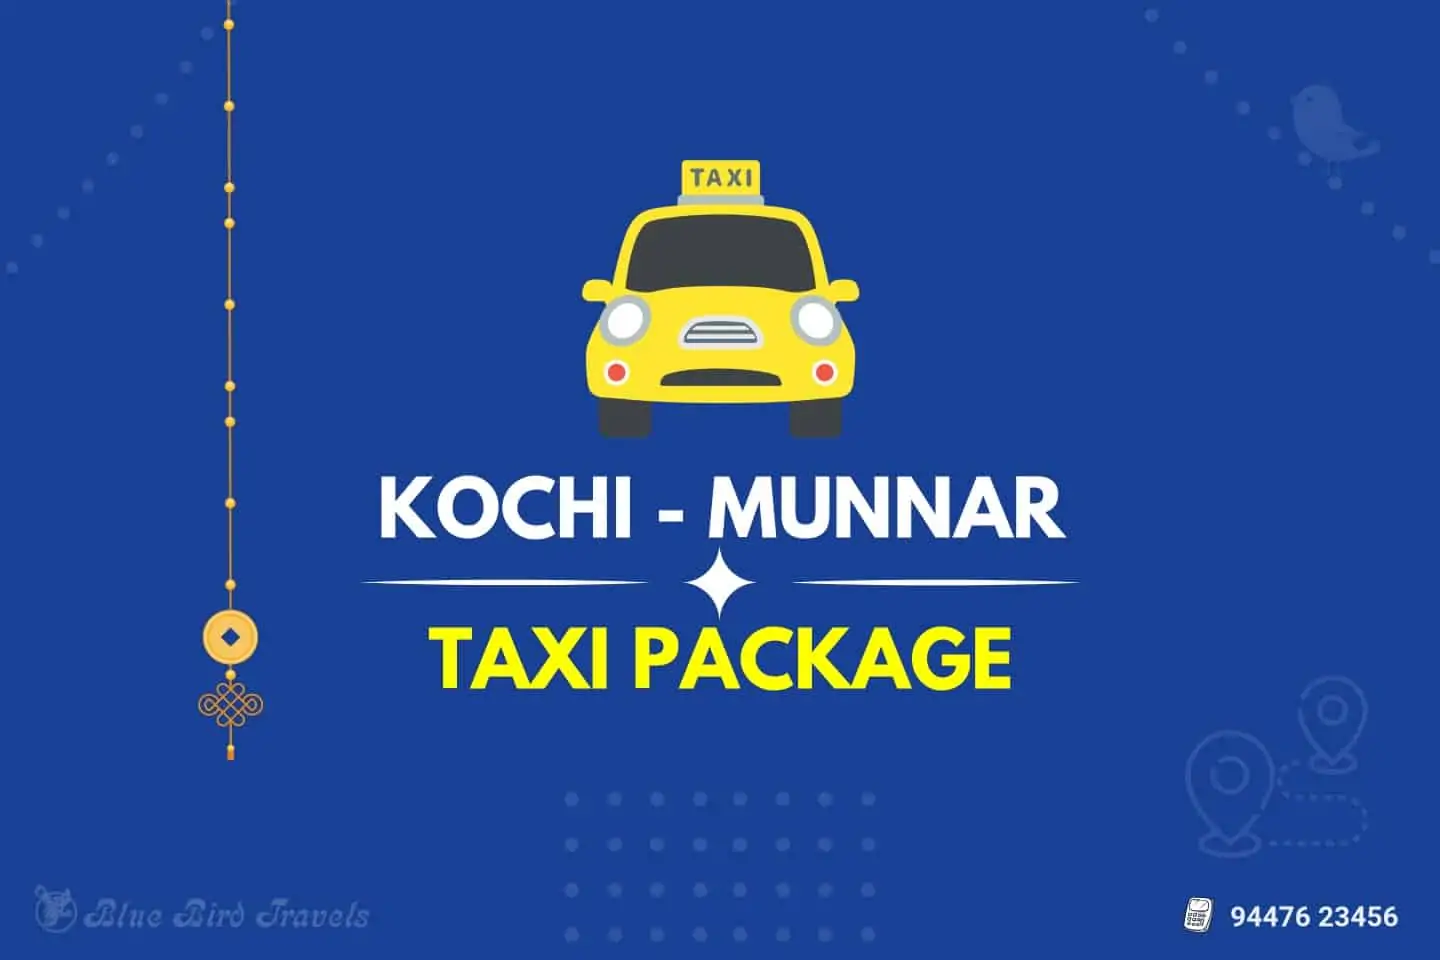 Product Kochi Munnar Taxi Package(Featured Image)